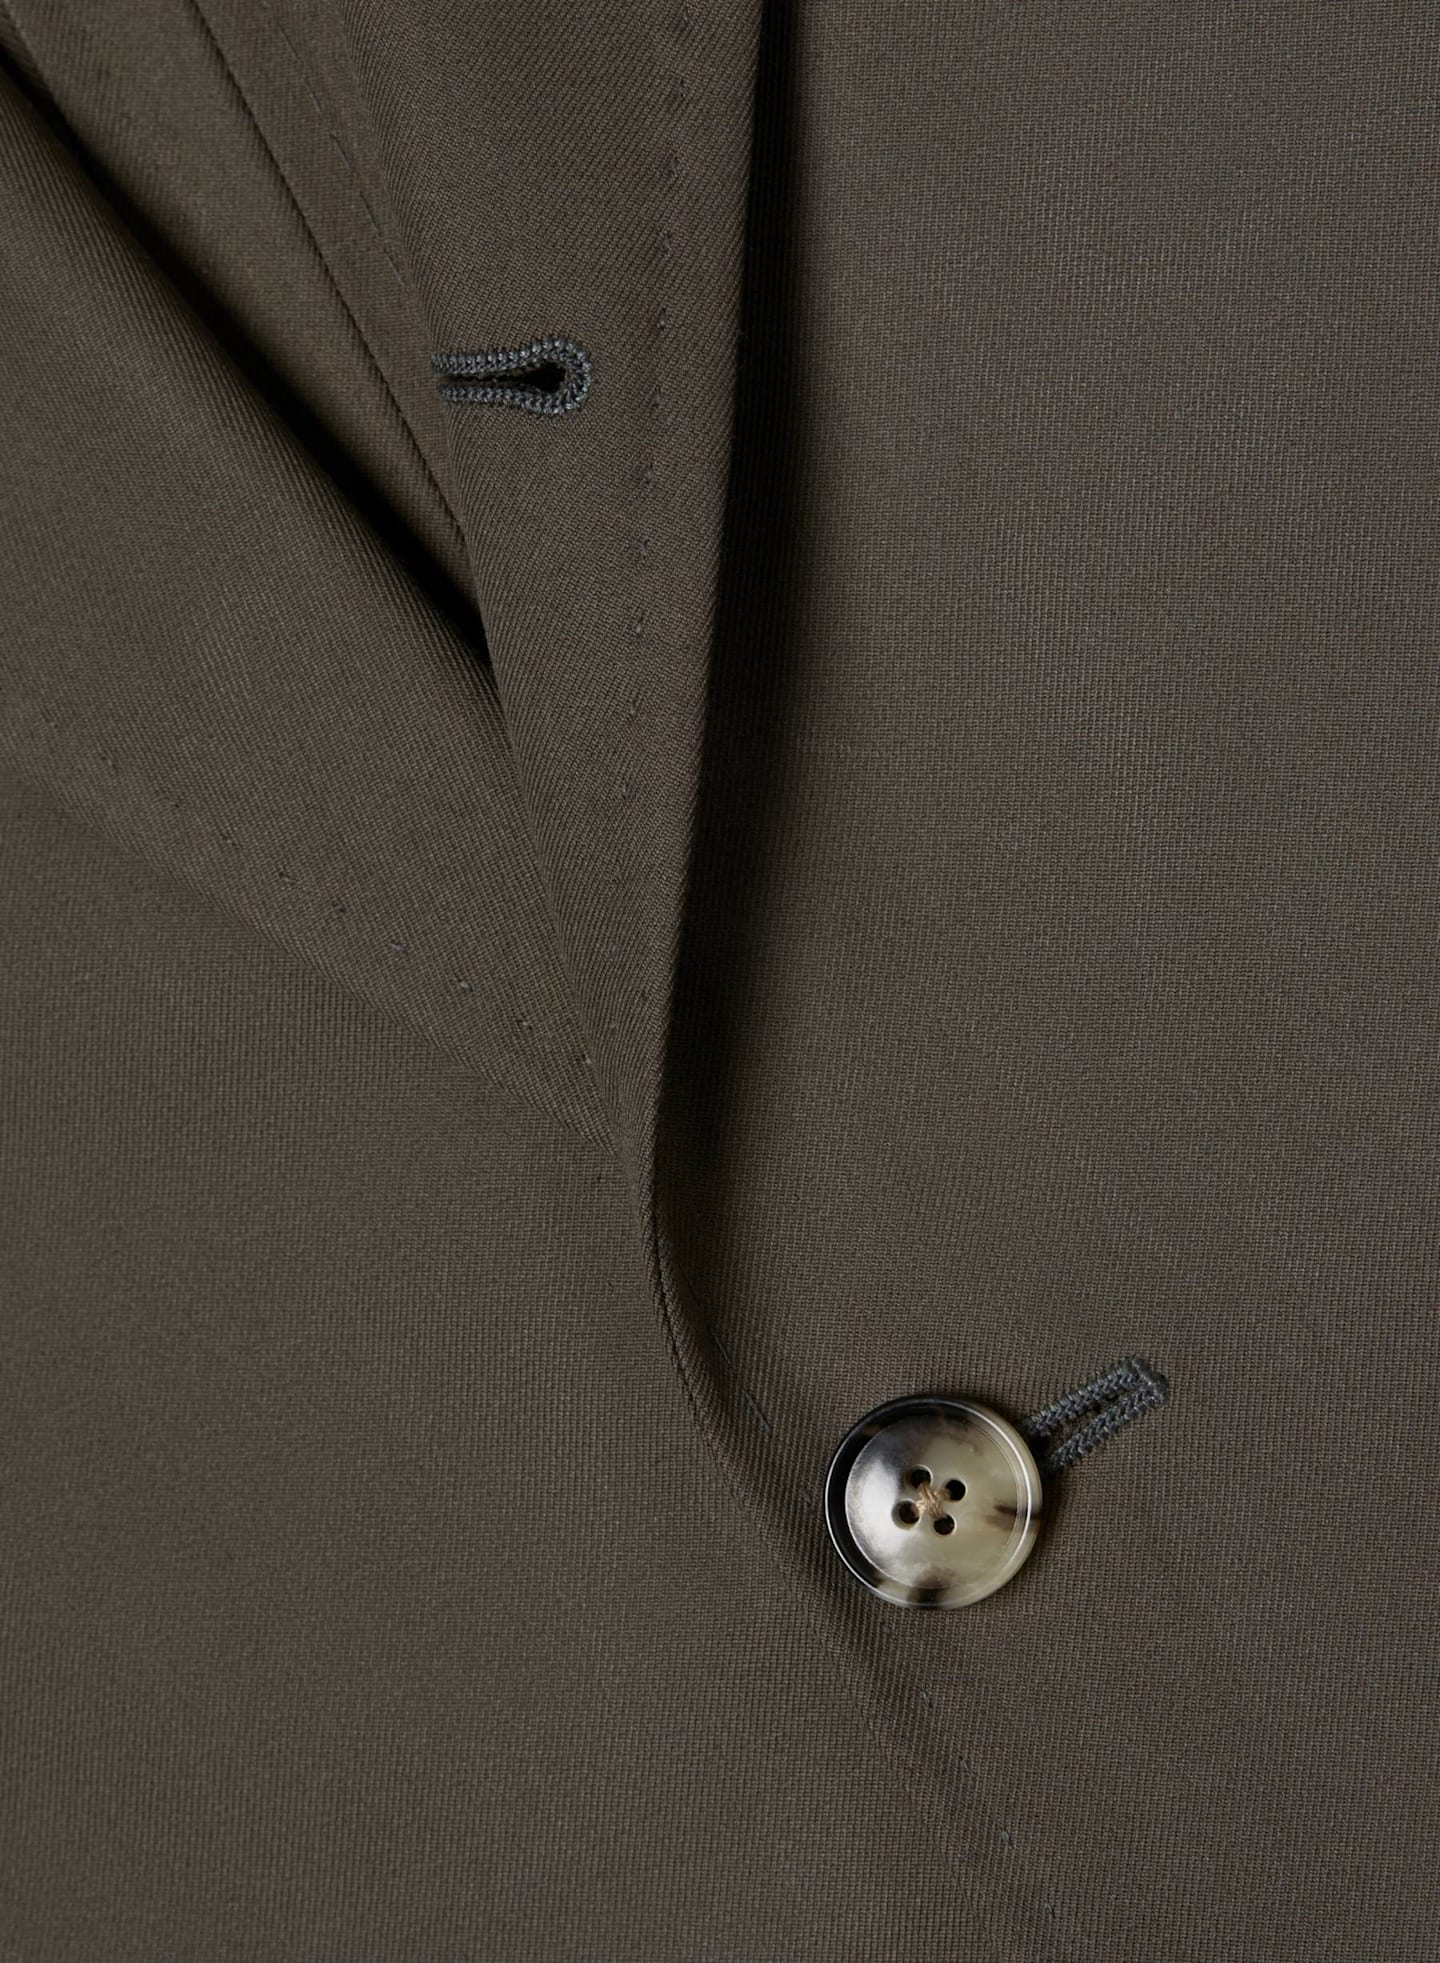 A mens jacket featuring a 2.5 button closure.